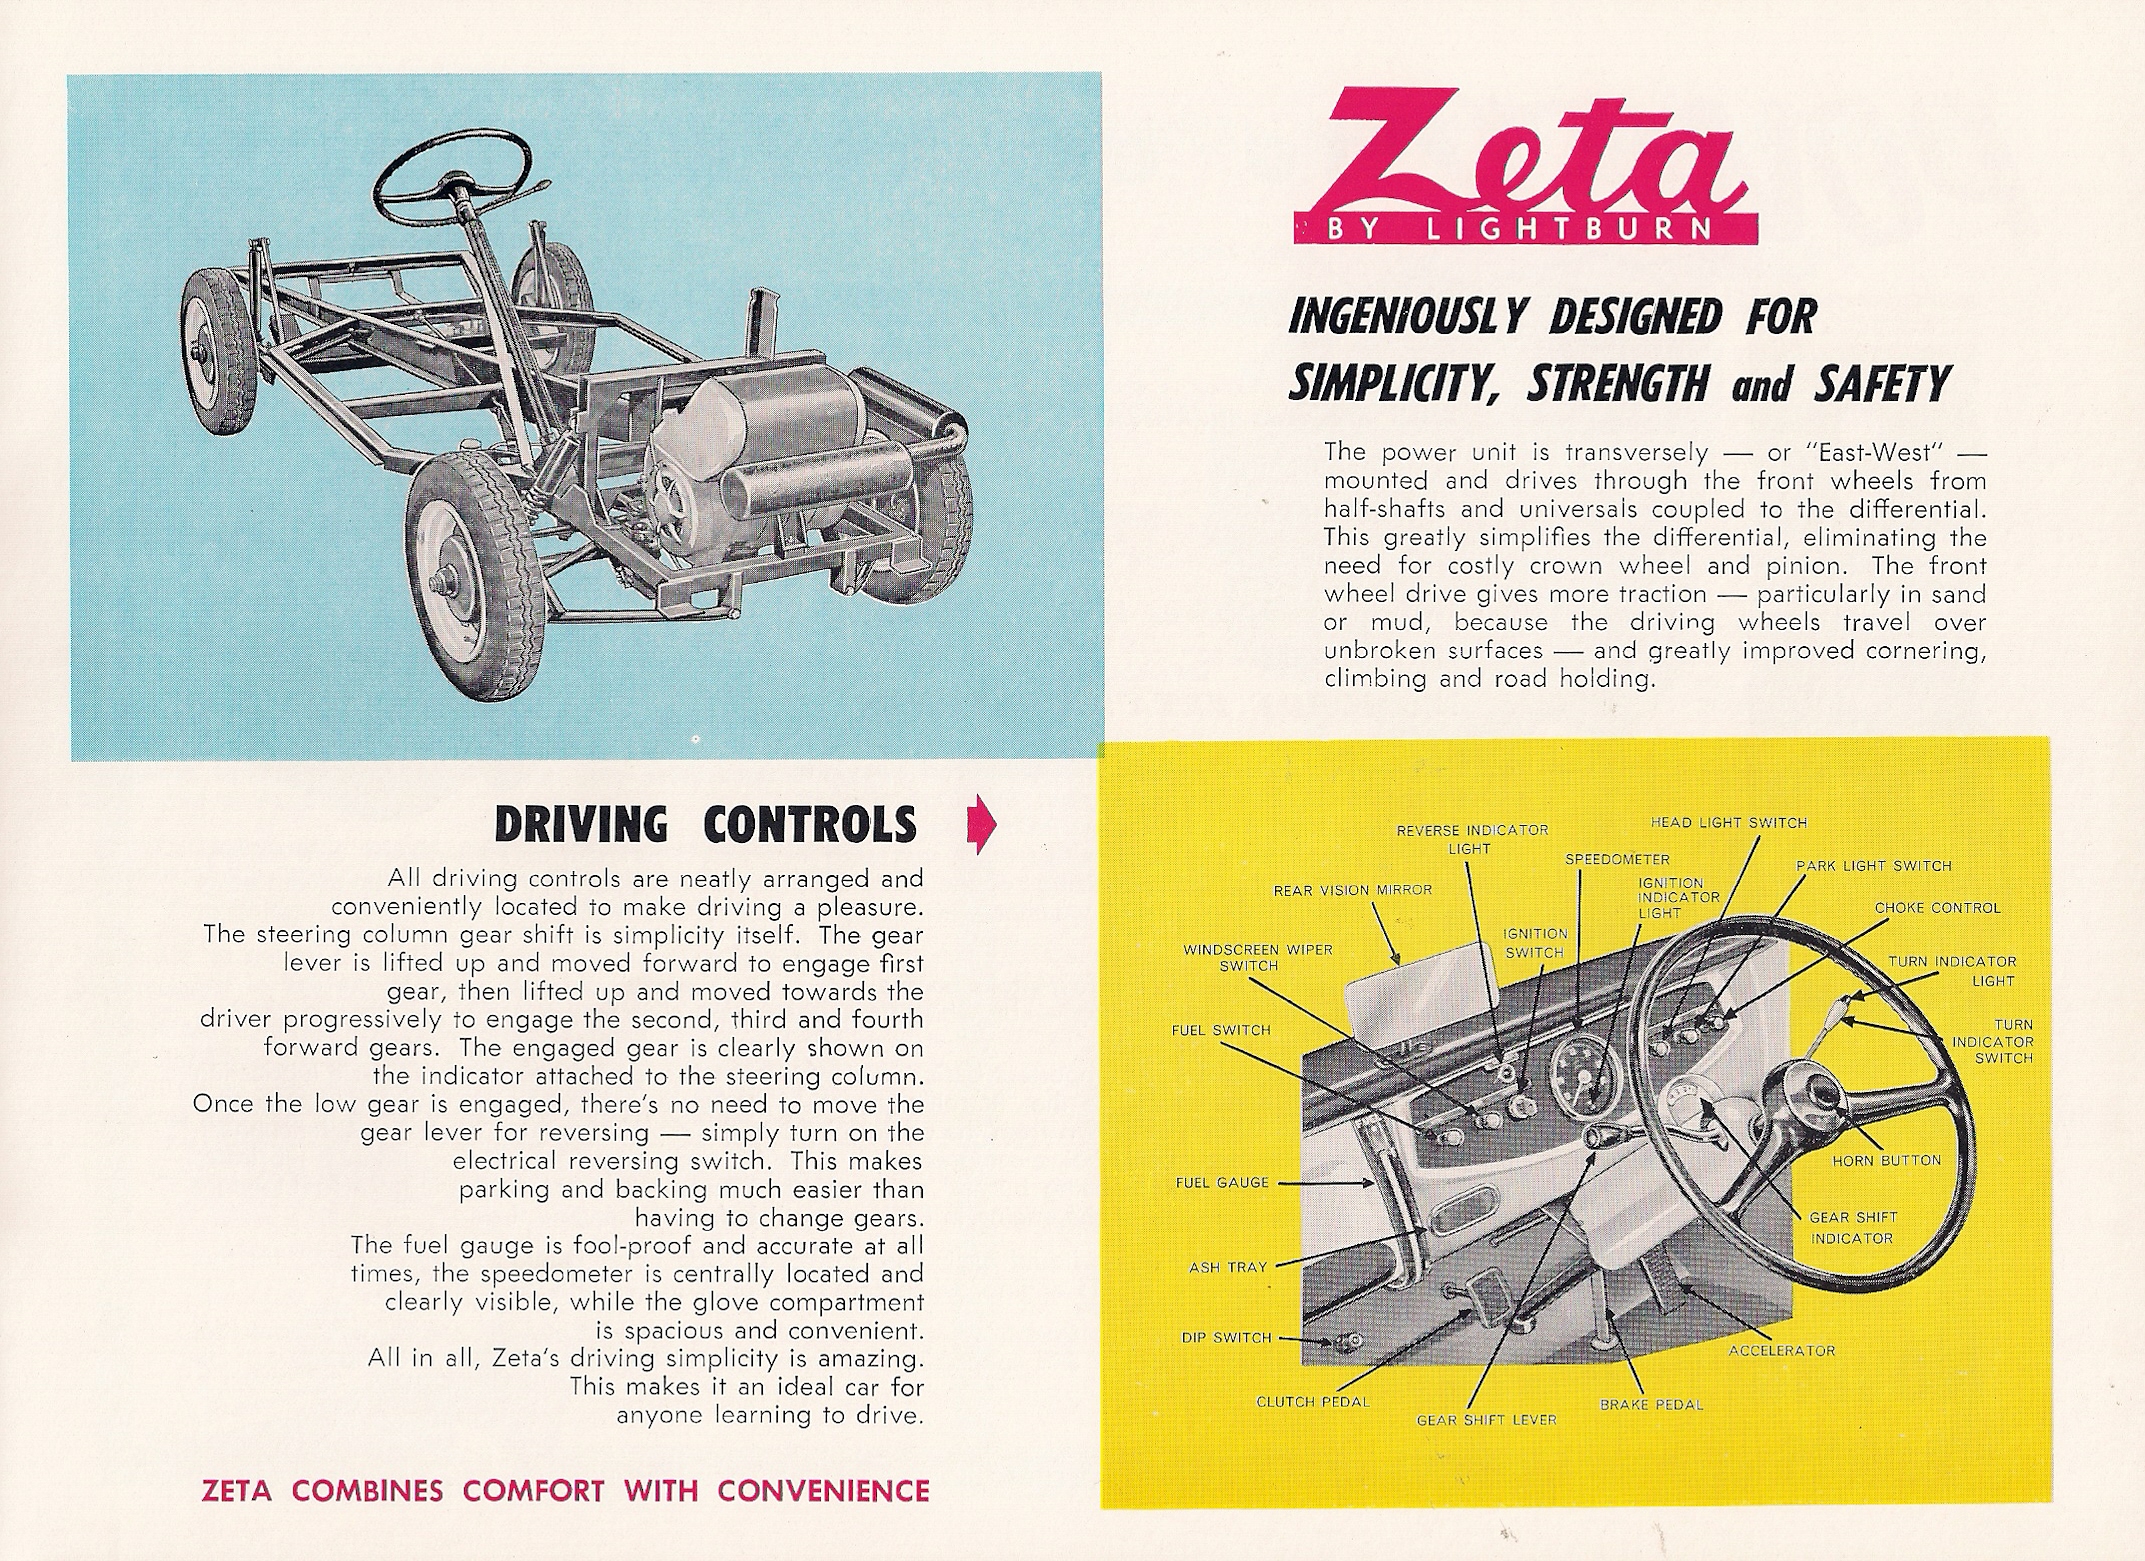 an old book page shows the parts and manuals of a vehicle